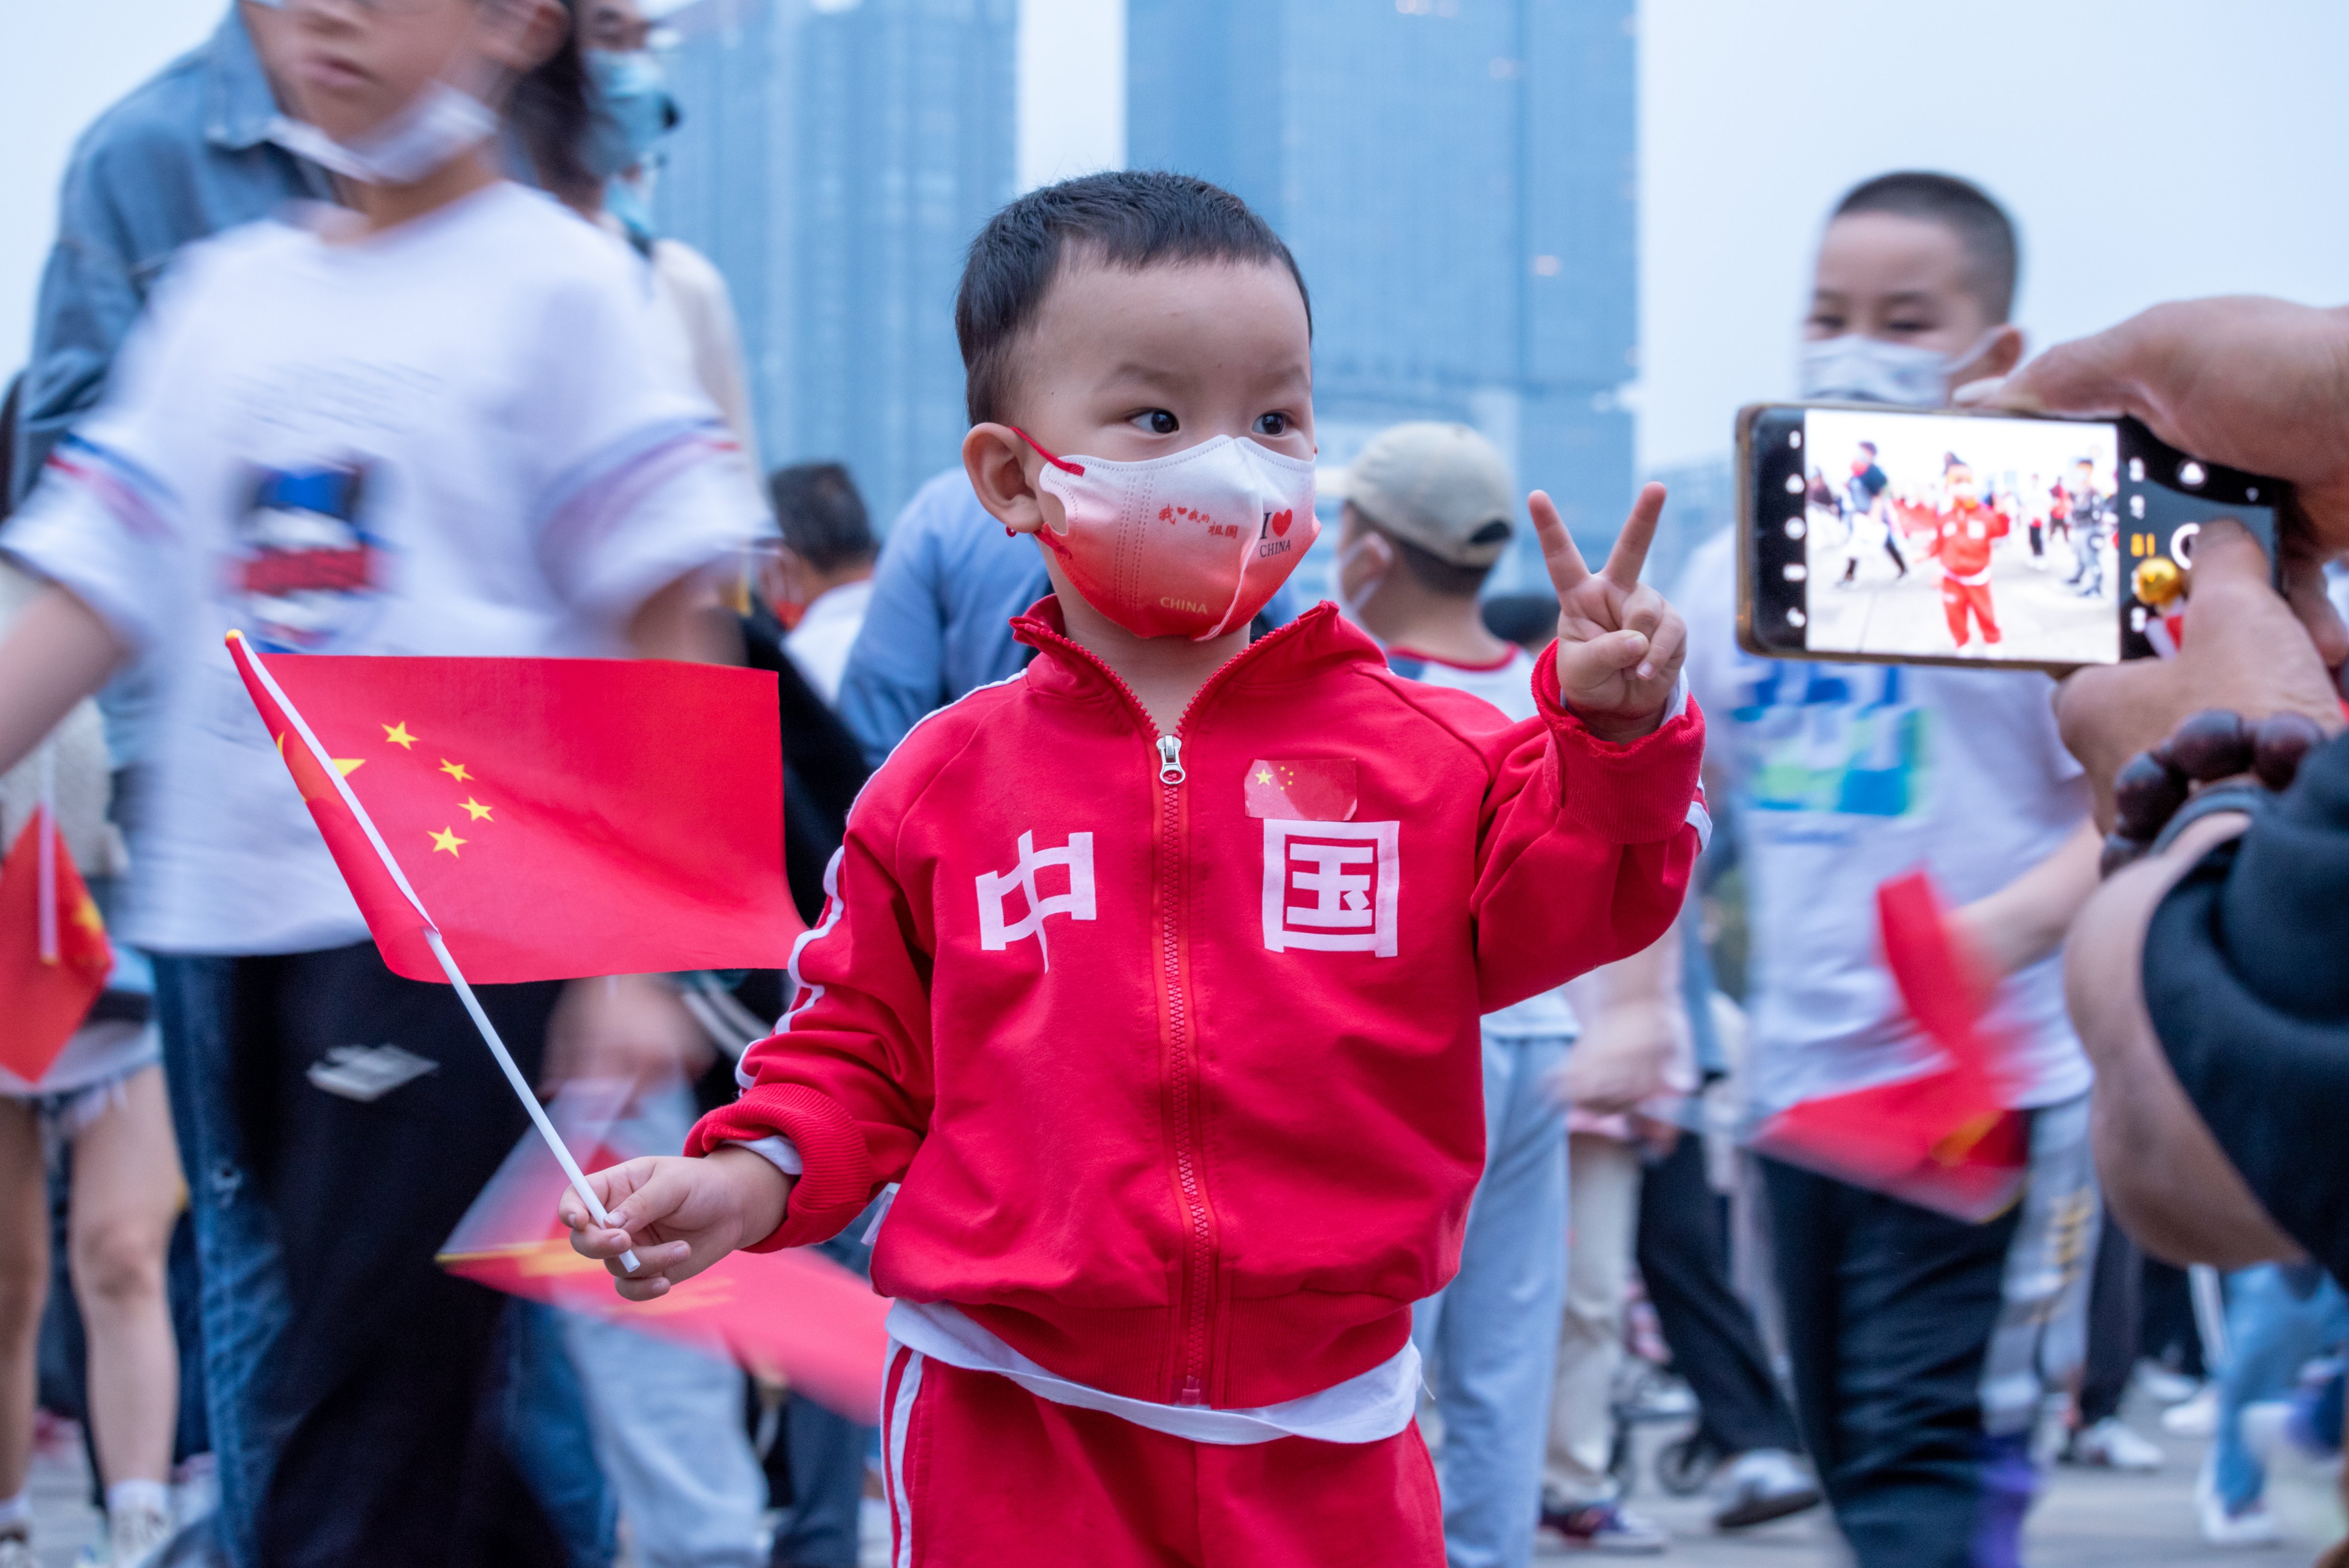 A child poses for a photo in Tianfu Square during a flag-raising ceremony celebrating the 73rd anniversary of the founding of the People's Republic of China in Chengdu, Sichuan, Oct. 1, 2022. (Wu Ke—VCG/Getty Images )